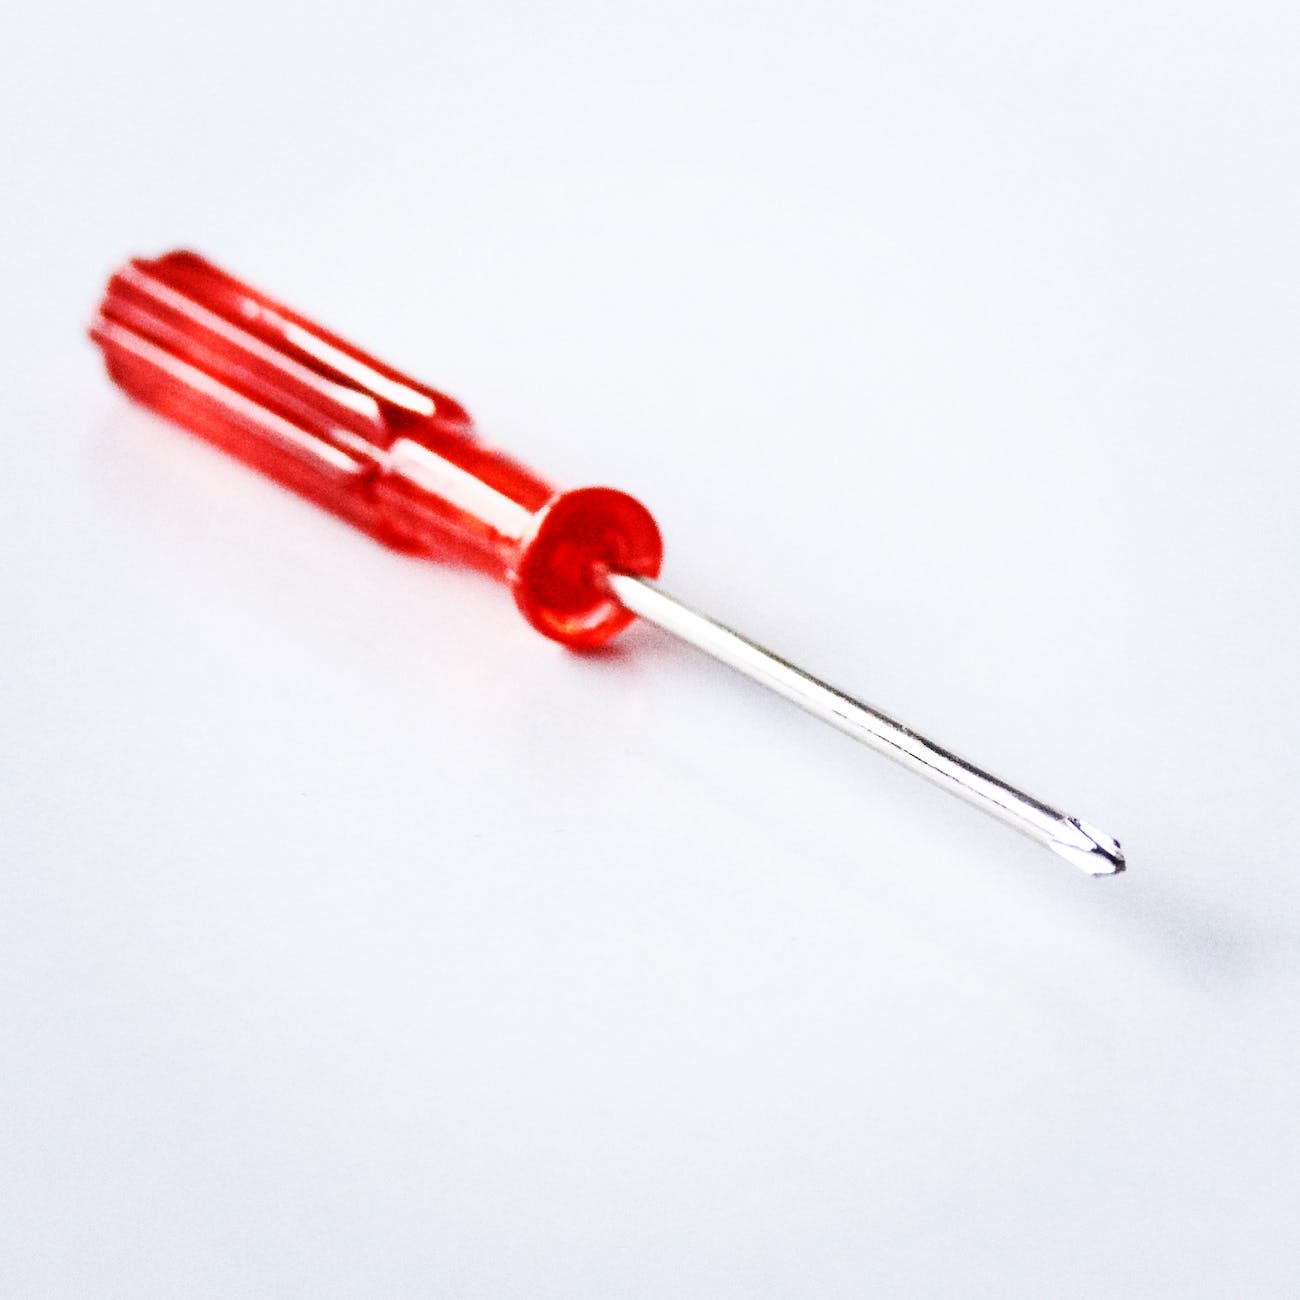 close up photography of red screwdriver